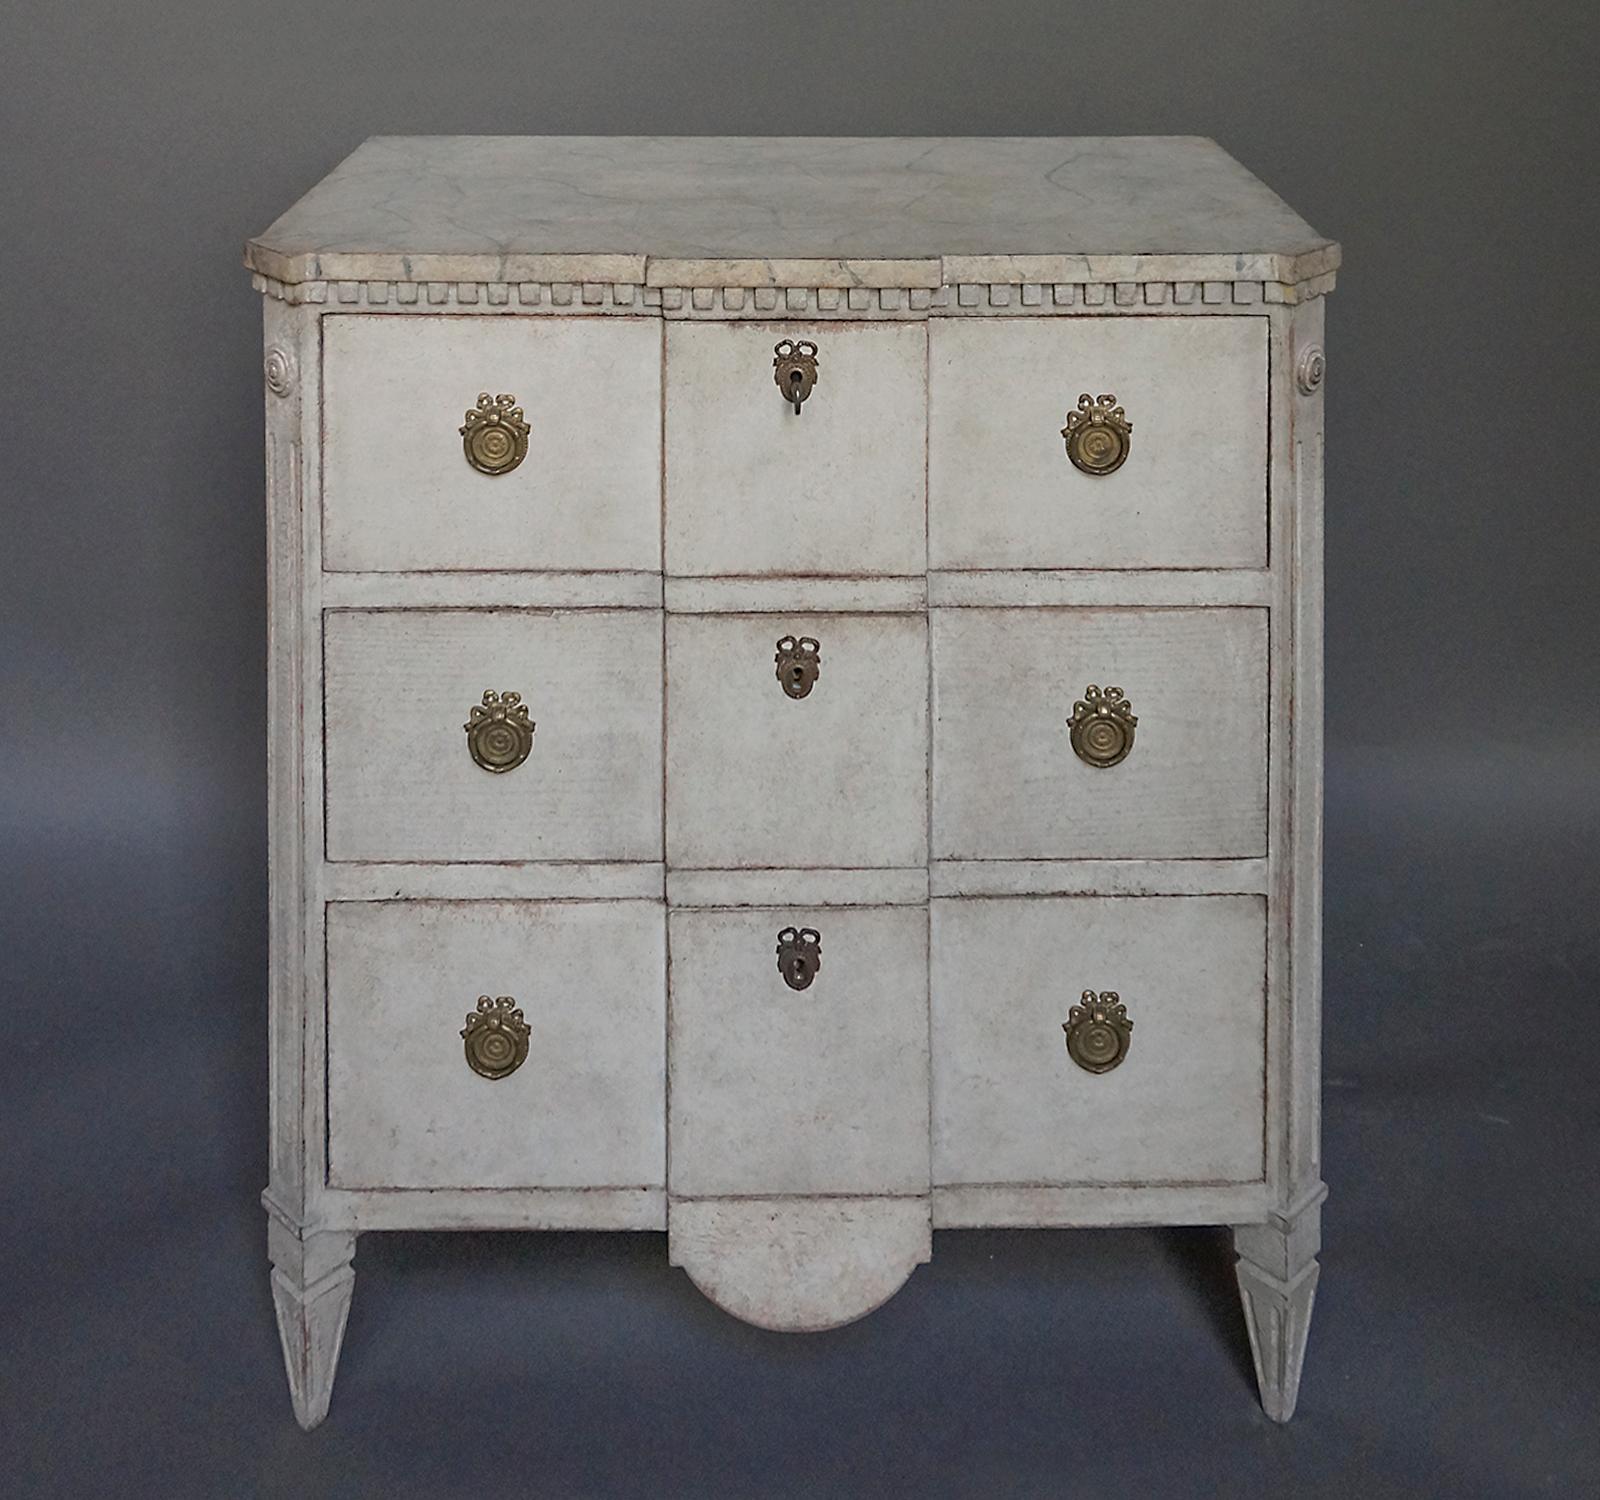 Swedish commode, circa 1860, with block front and shaped apron. The top is painted with a green marble pattern and has decorative dentil molding below. The three drawers lock with a single key, and the canted corner blocks terminate in tapering